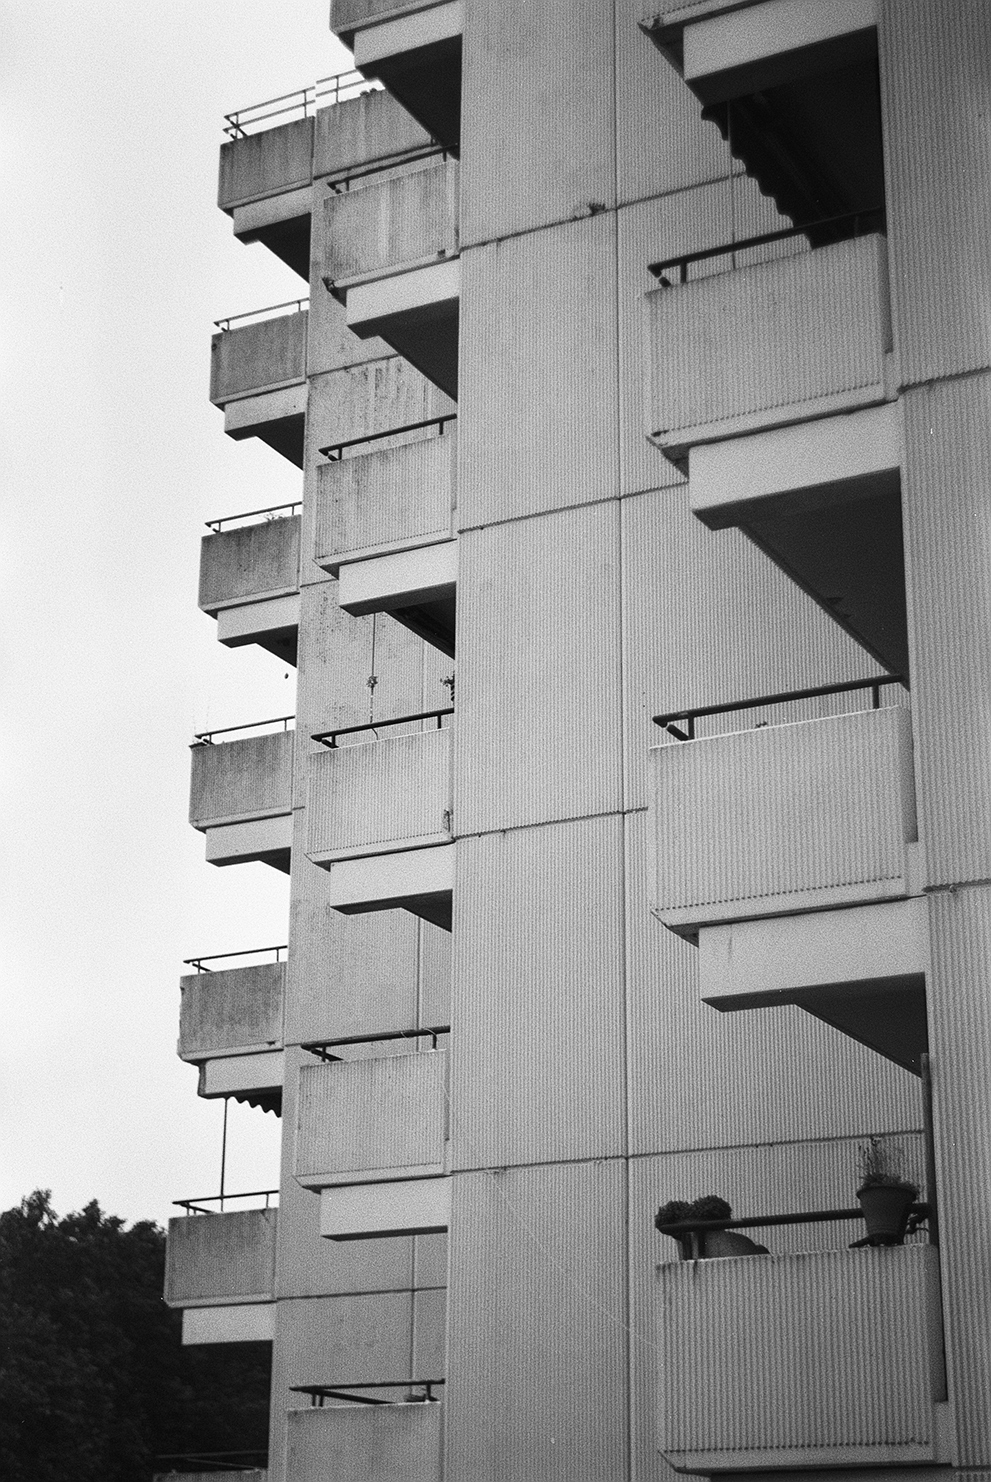 The monotony of balconies on an 80s apartment block. Shot on Fomapan 100 classic.